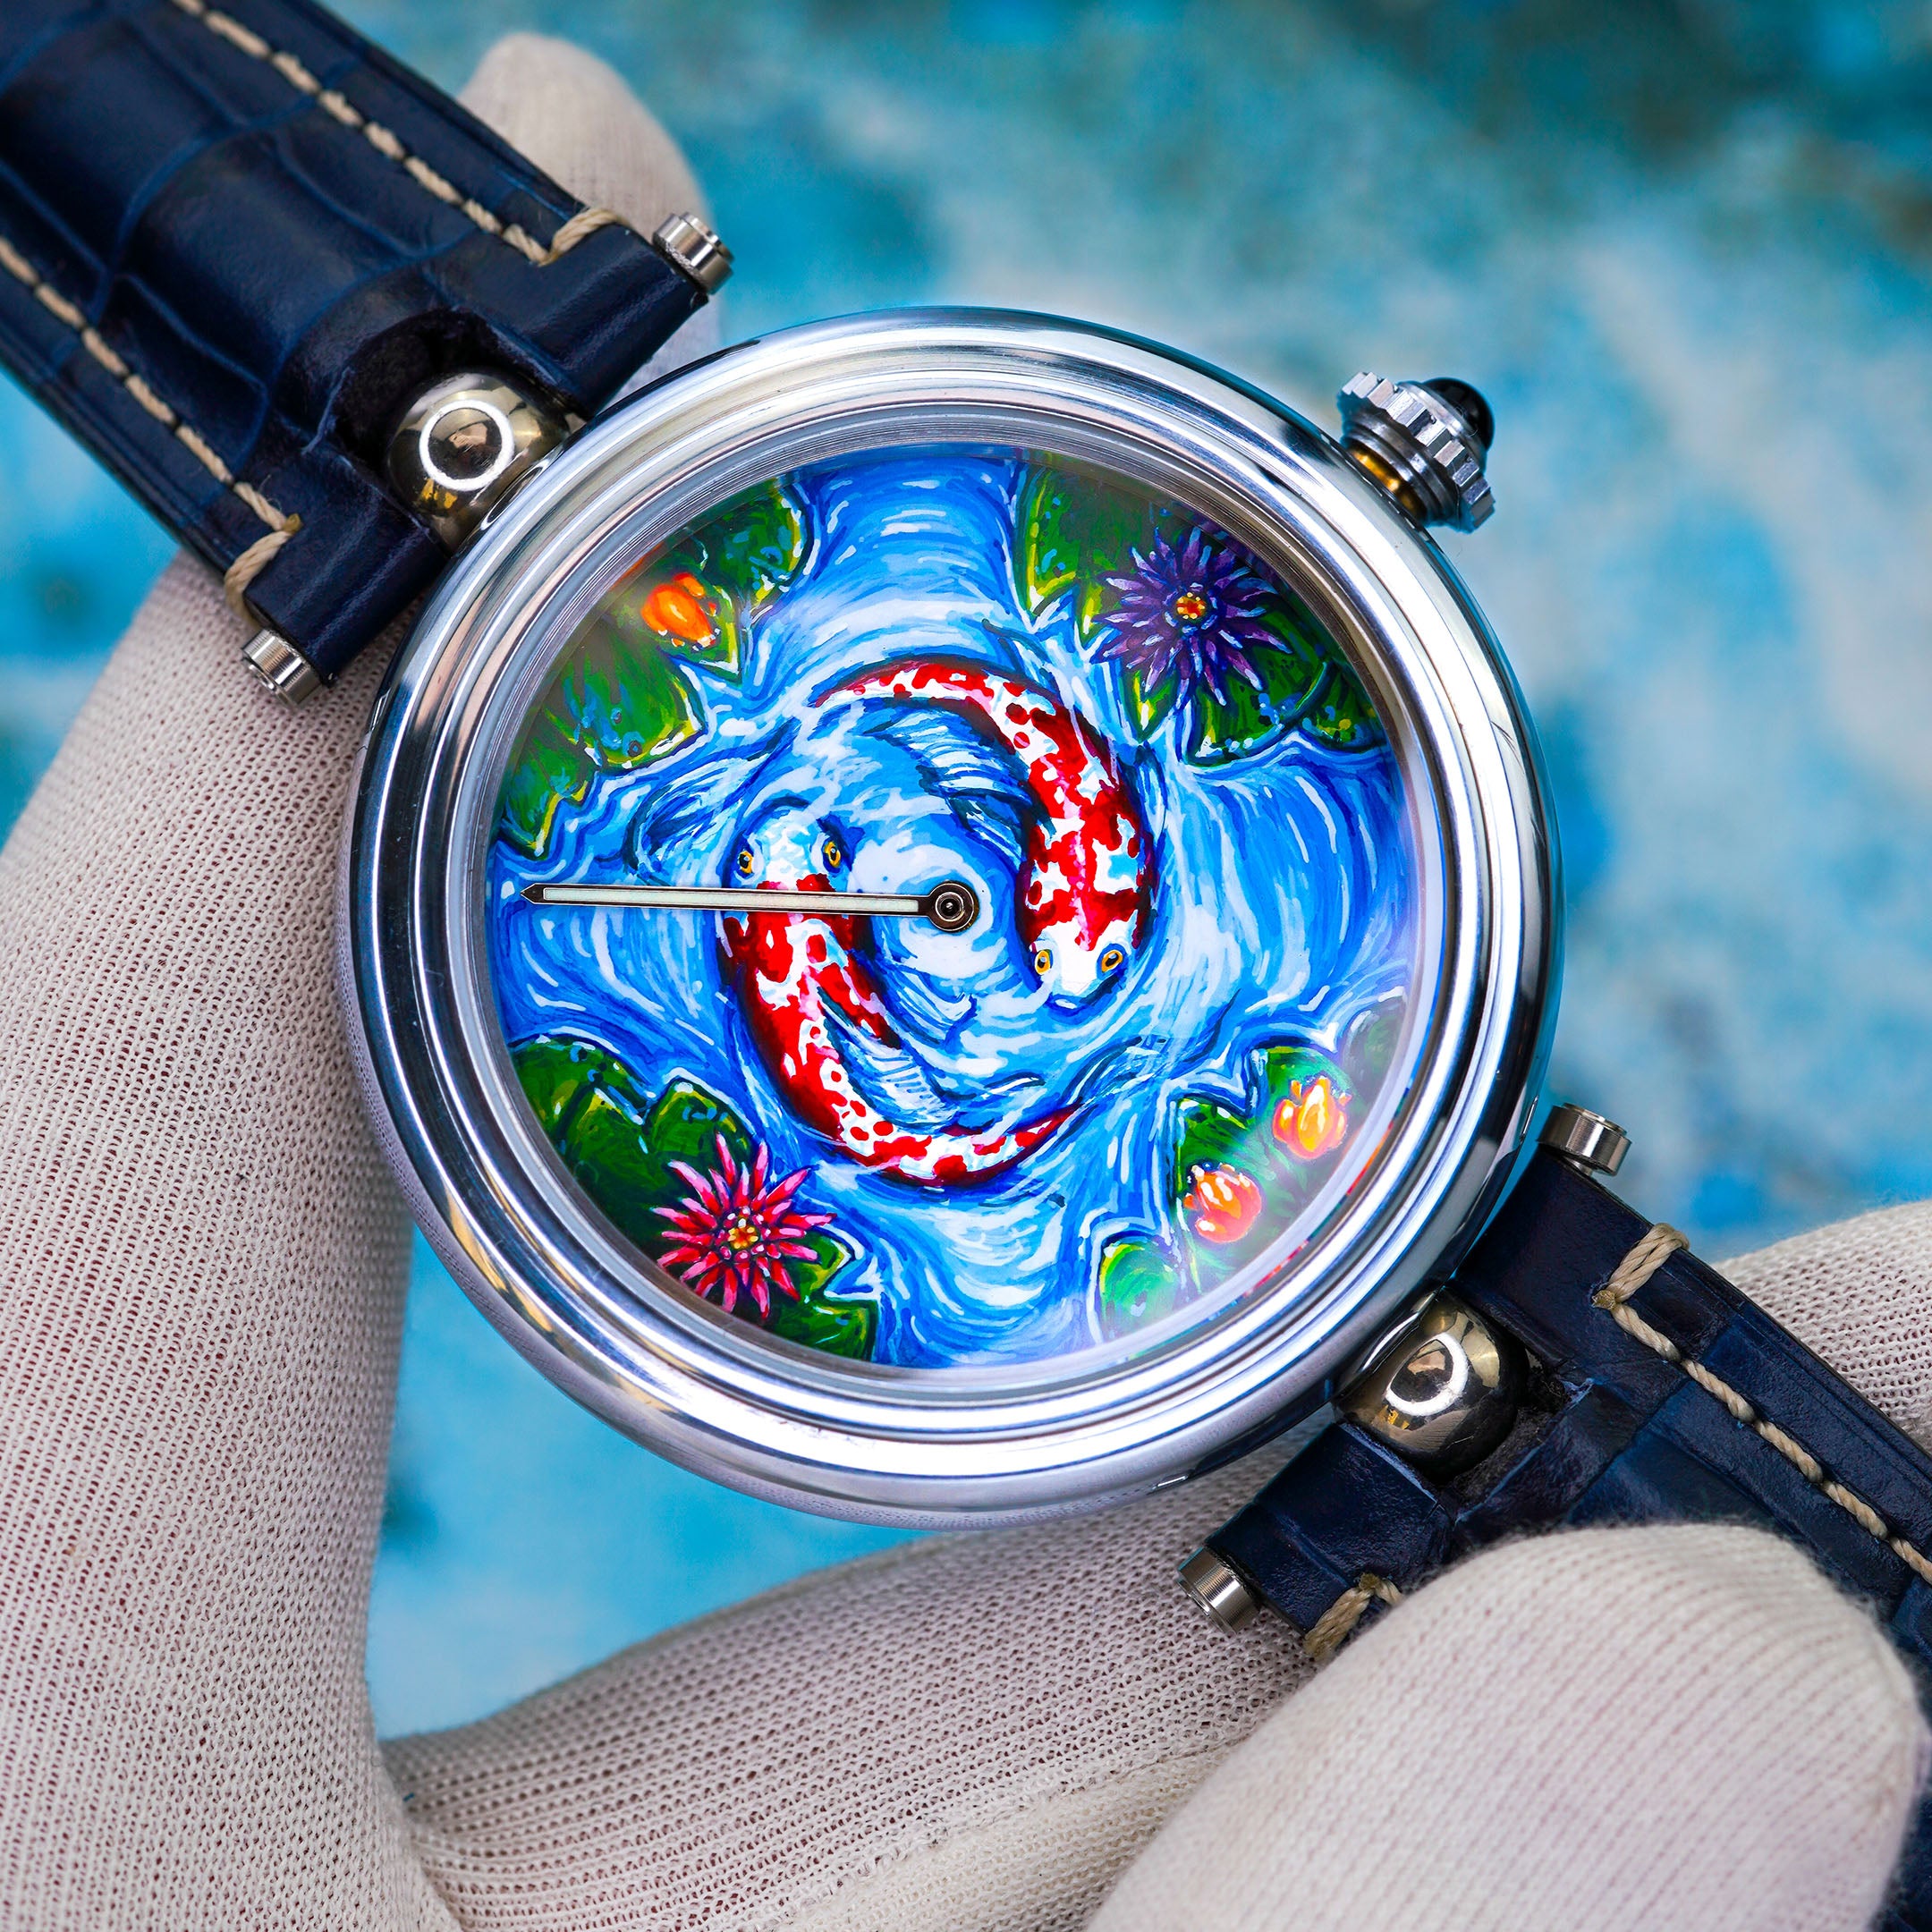 Customized watch design, hand-painted dial art for your wrist